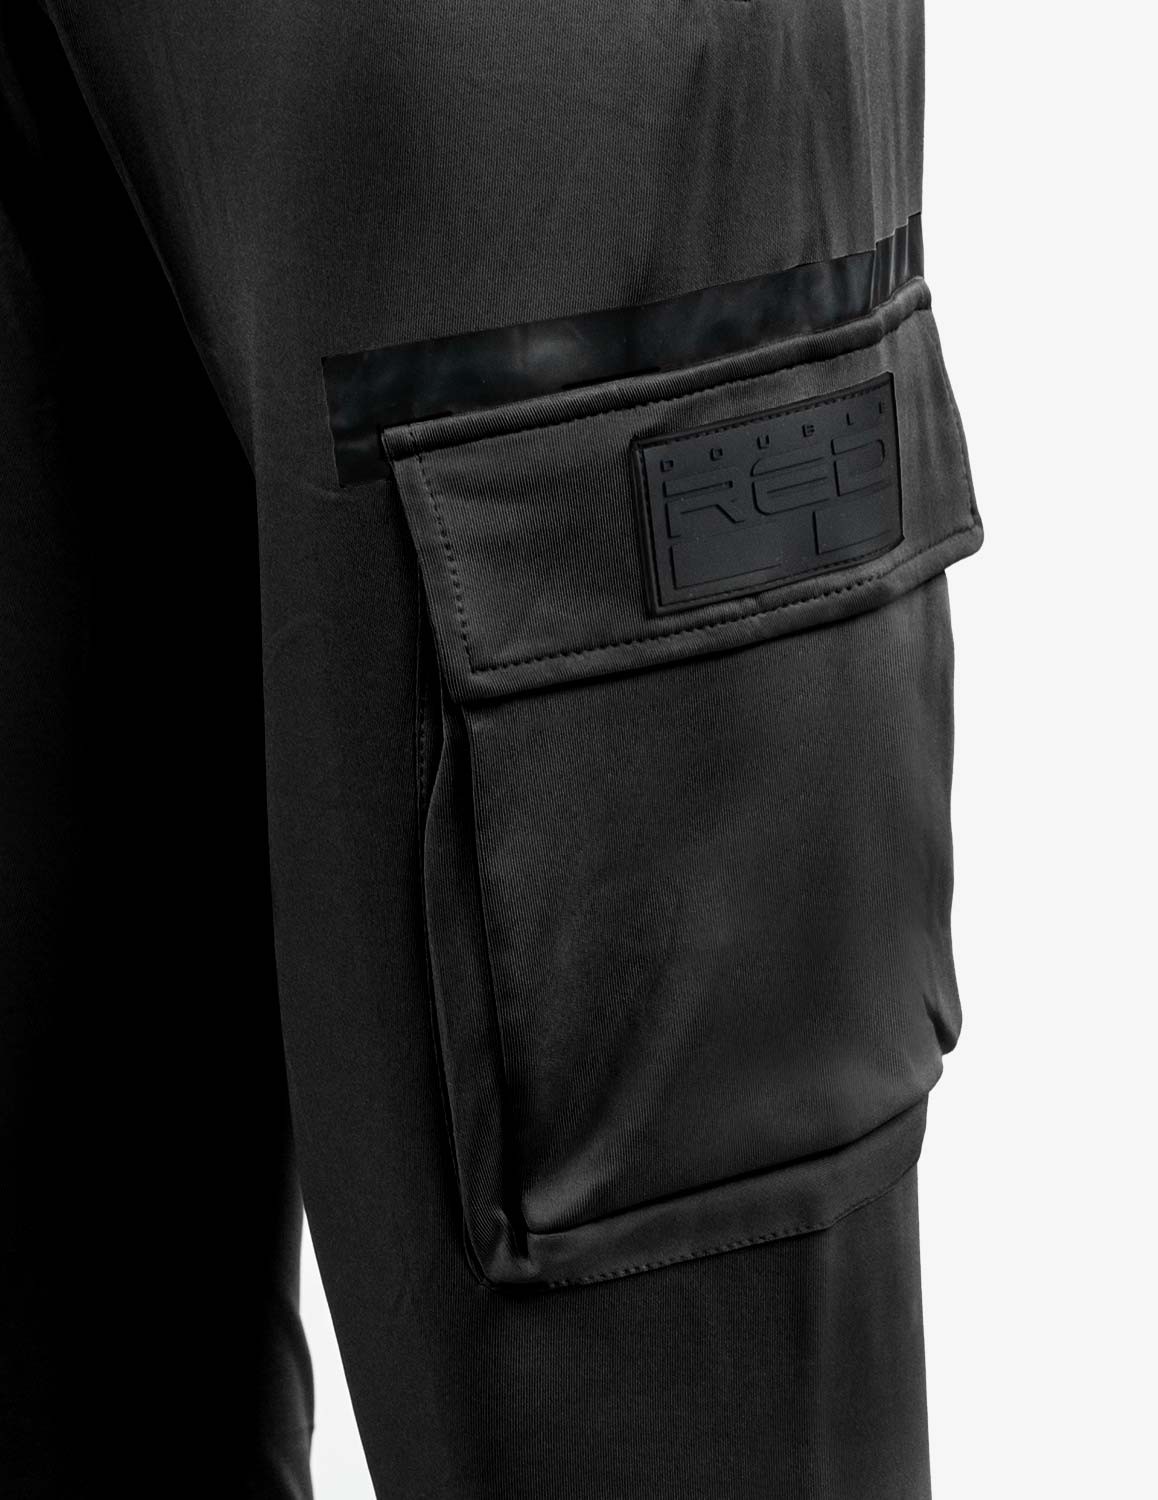 THE PUNISHER Sweatpants ALL Black